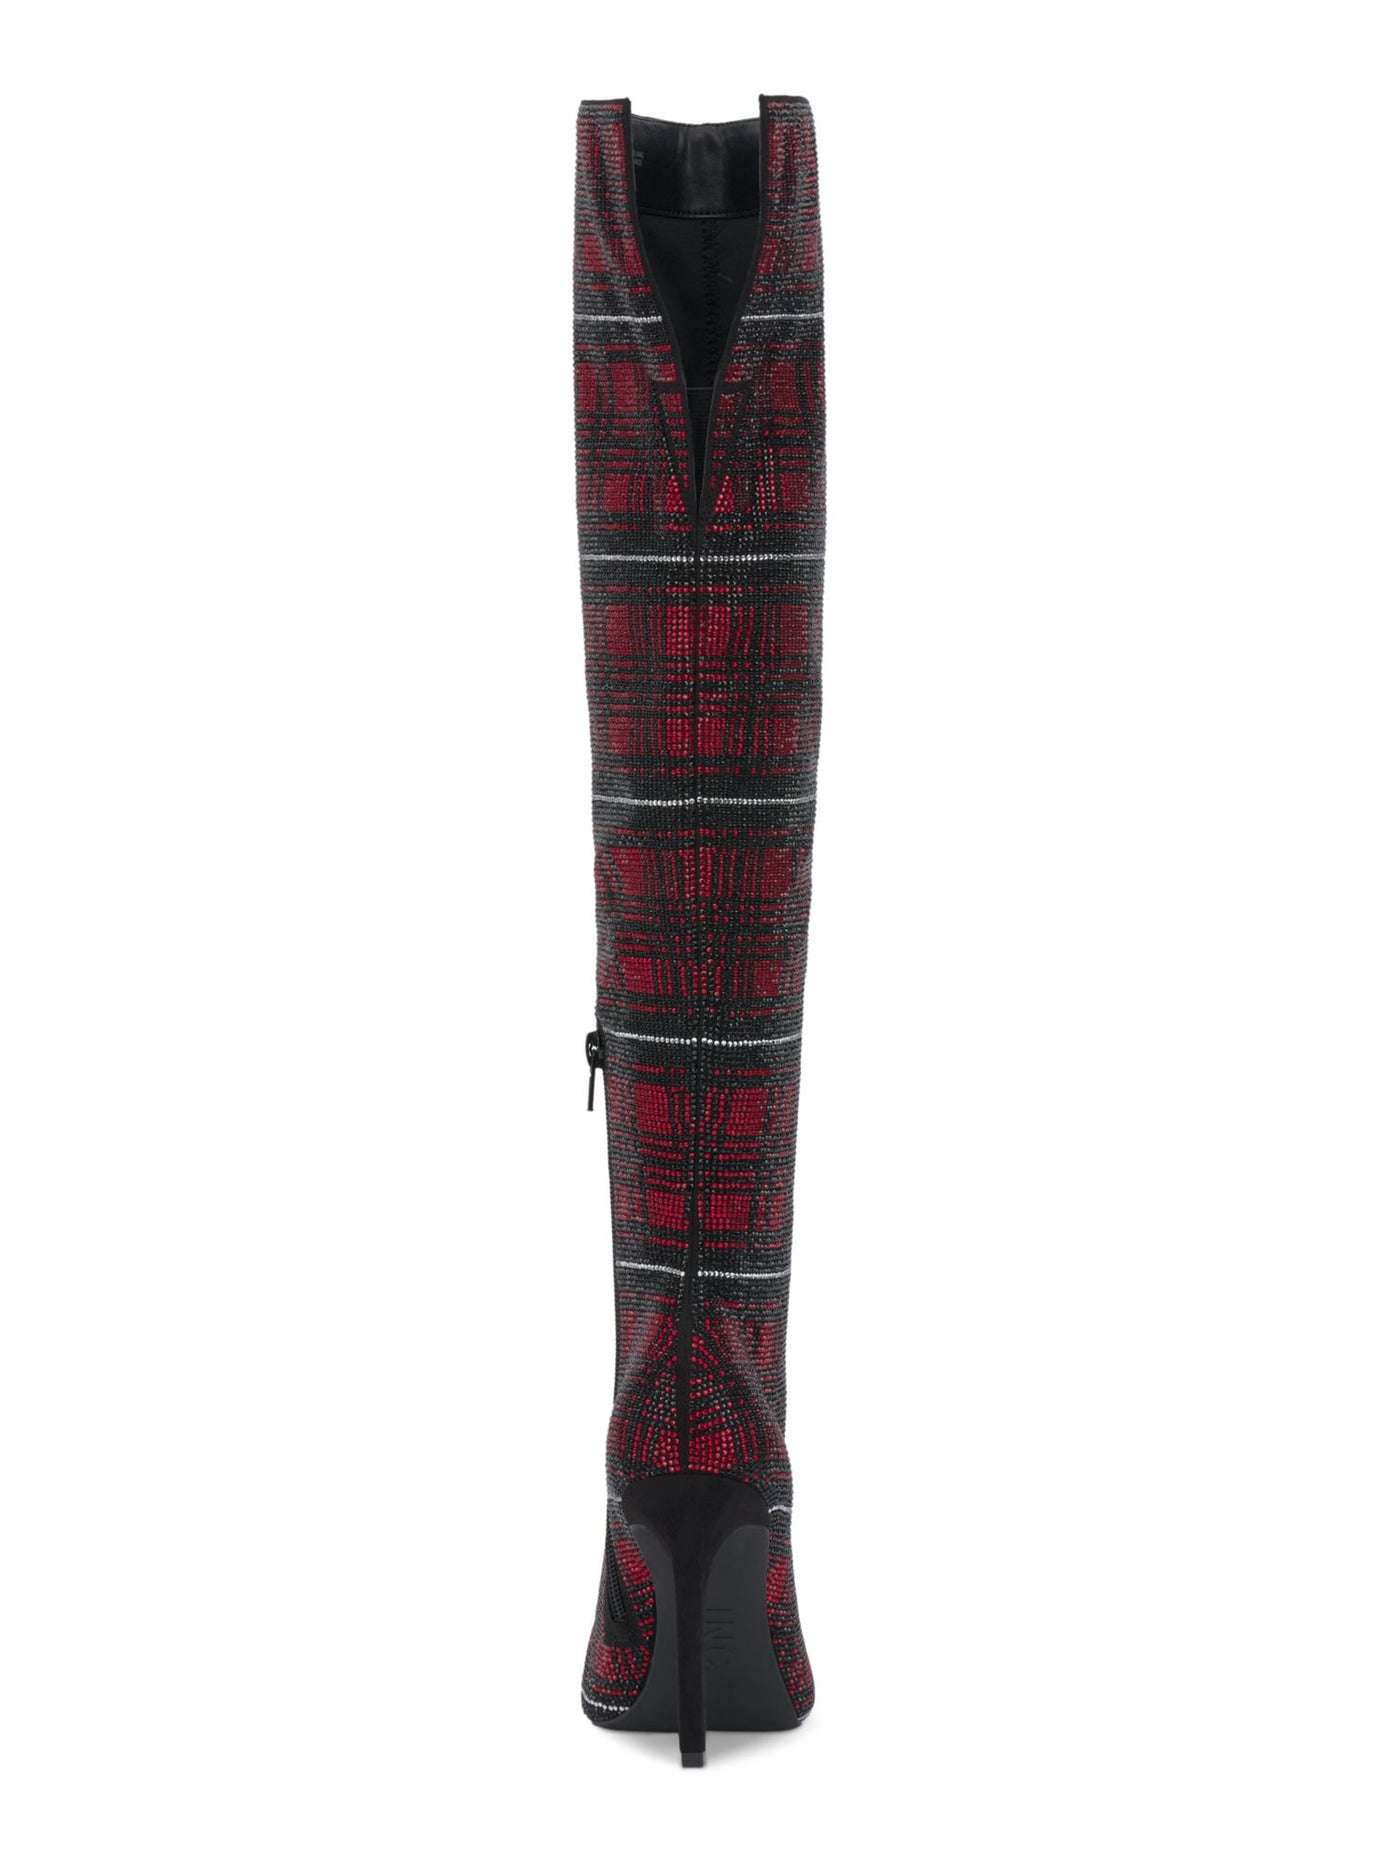 INC Womens Red Plaid Vented Back Padded Rhinestone Goring Saveria Pointed Toe Stiletto Zip-Up Dress Boots 8.5 M